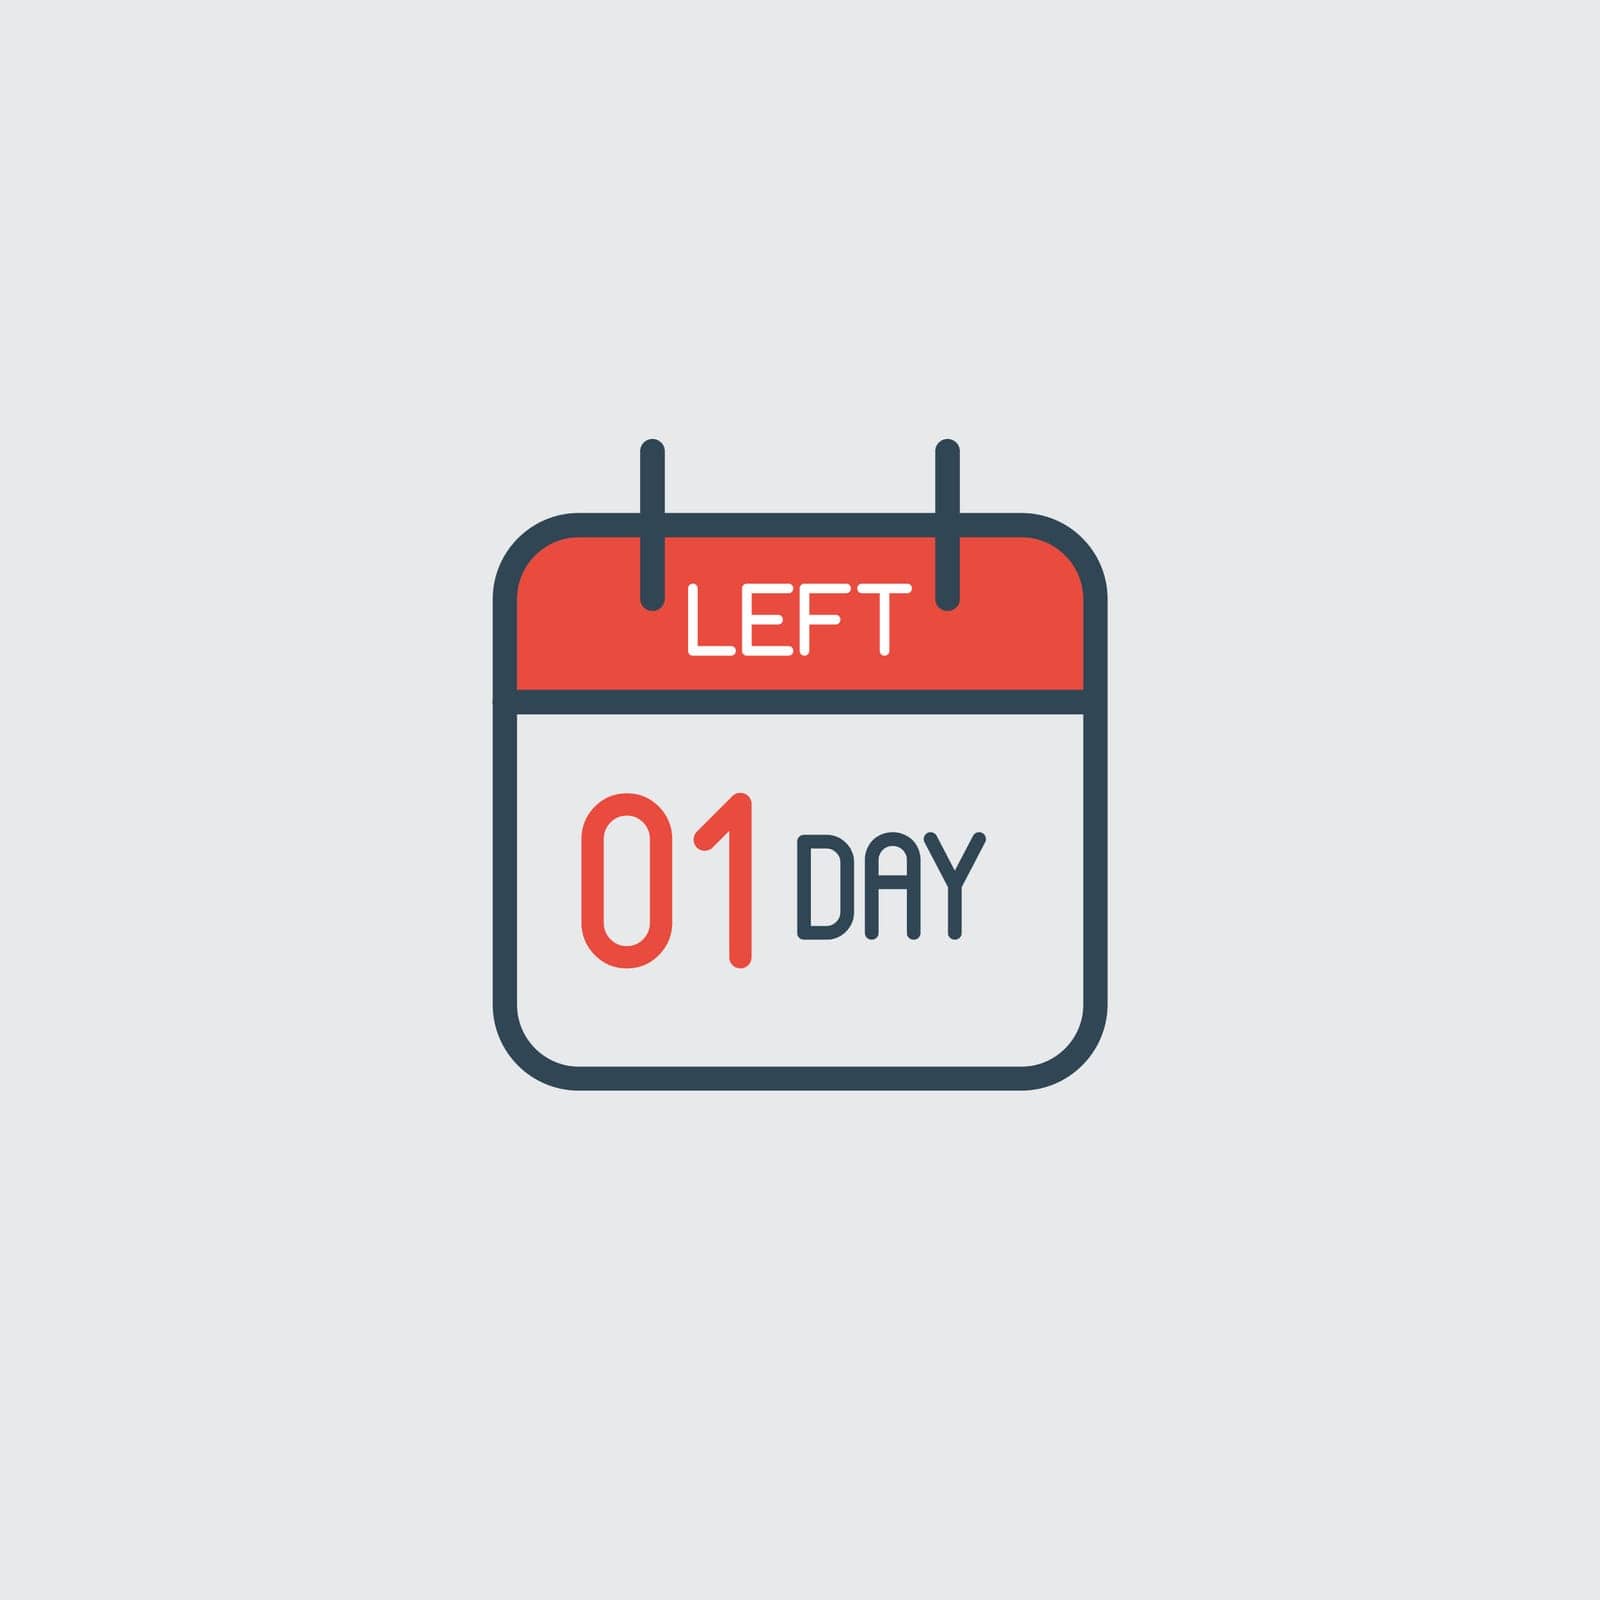 Countdown daily page calendar icon 01 days left. Number day to go. Agenda app, business deadline, date. Reminder, schedule simple pictogram.